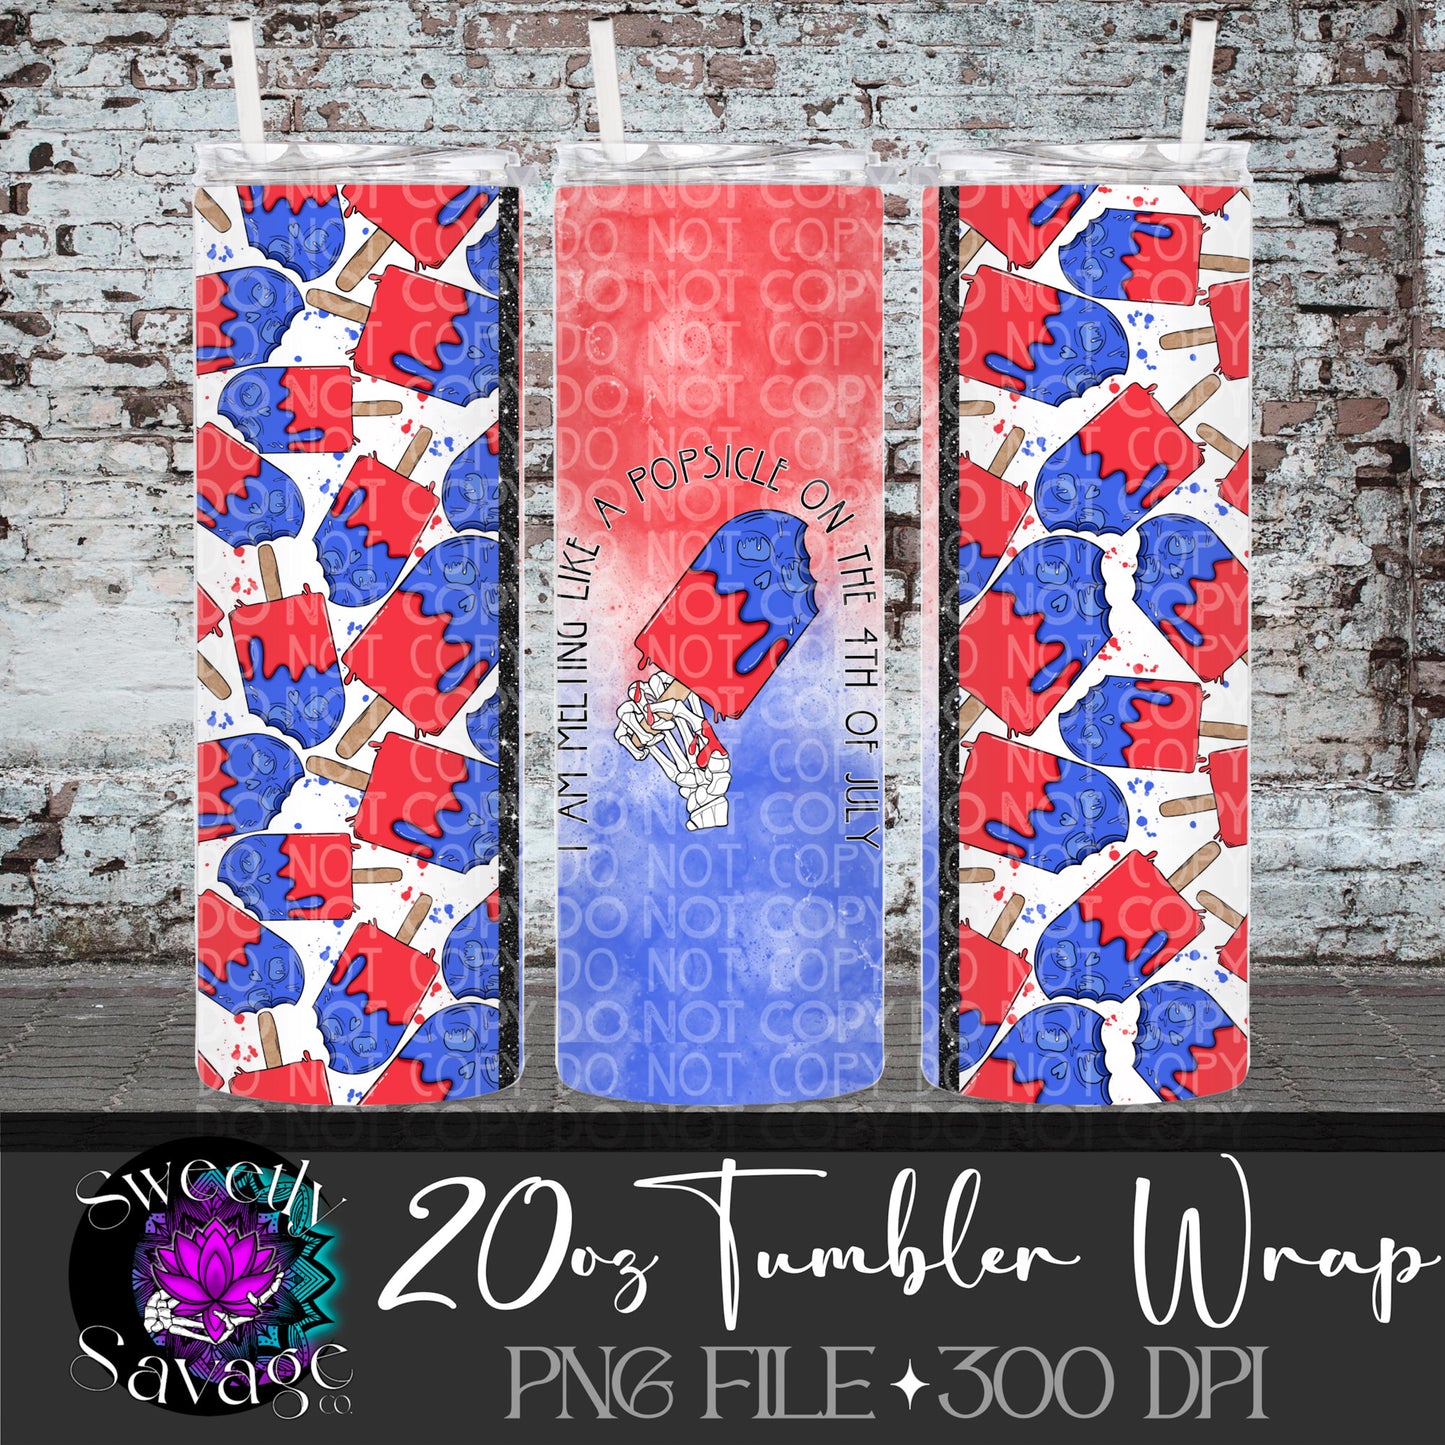 Melting like a popsicle on the 4th of July 20oz Skinny Tumbler File